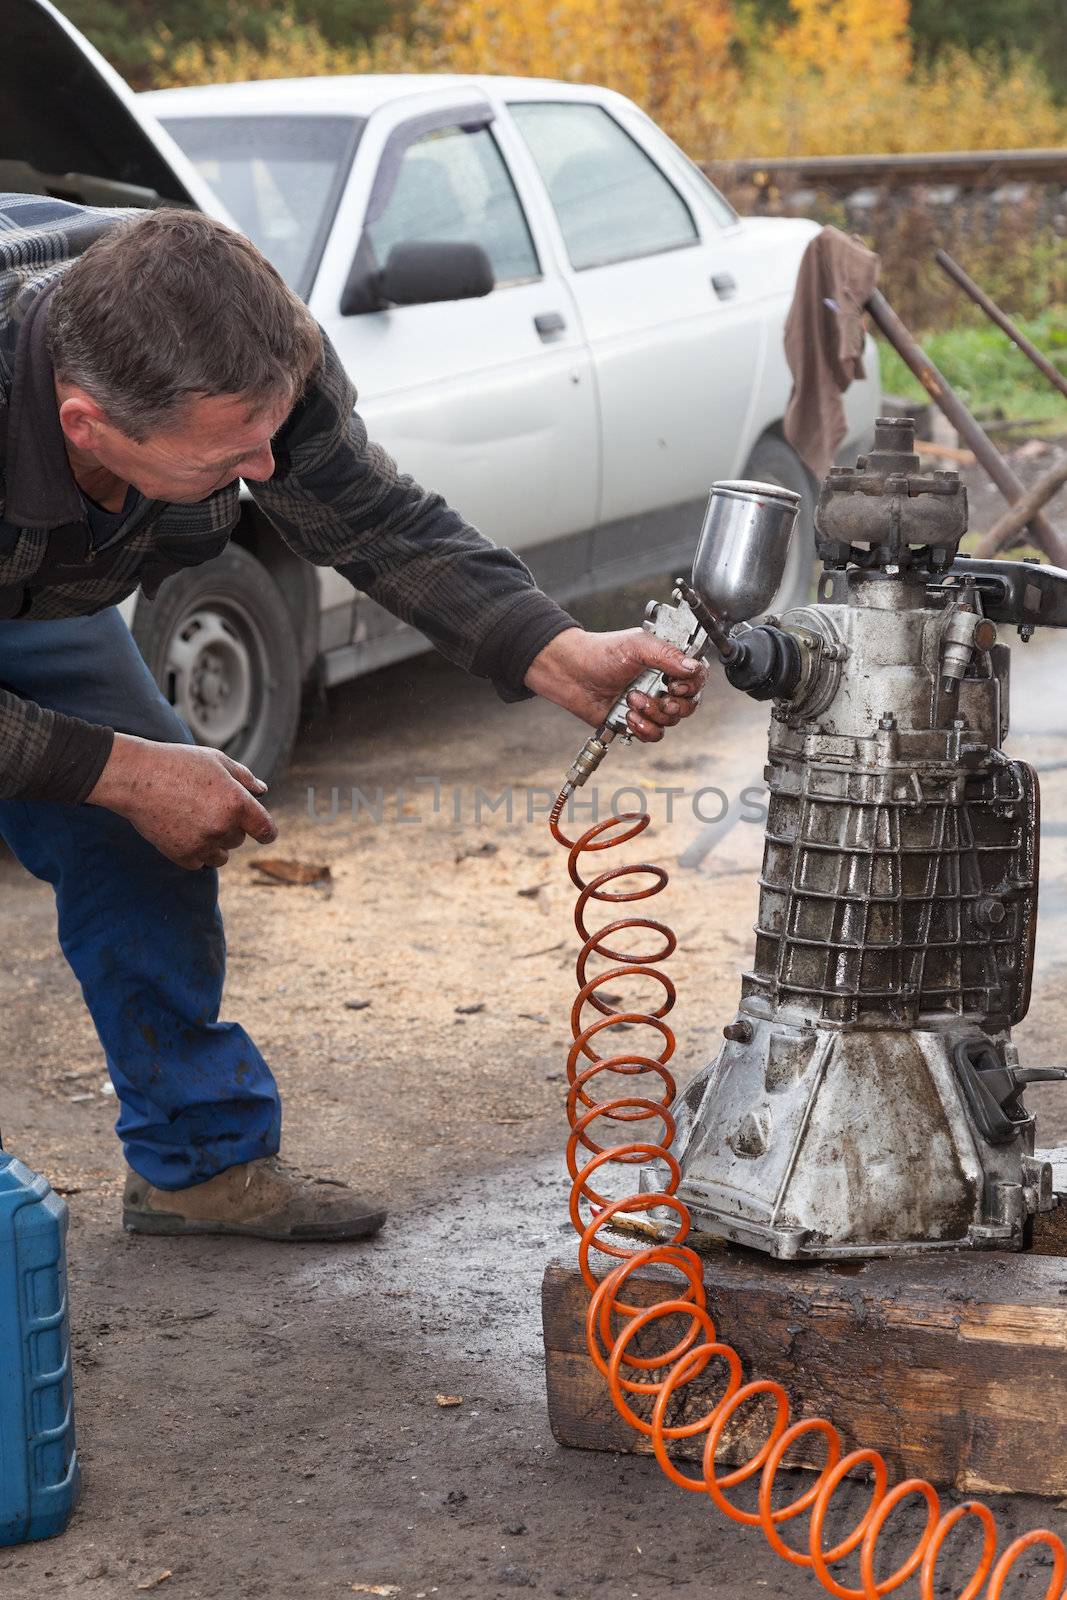 A man cleans the gearbox taken from the car for repair, using the gasoline and airbrush